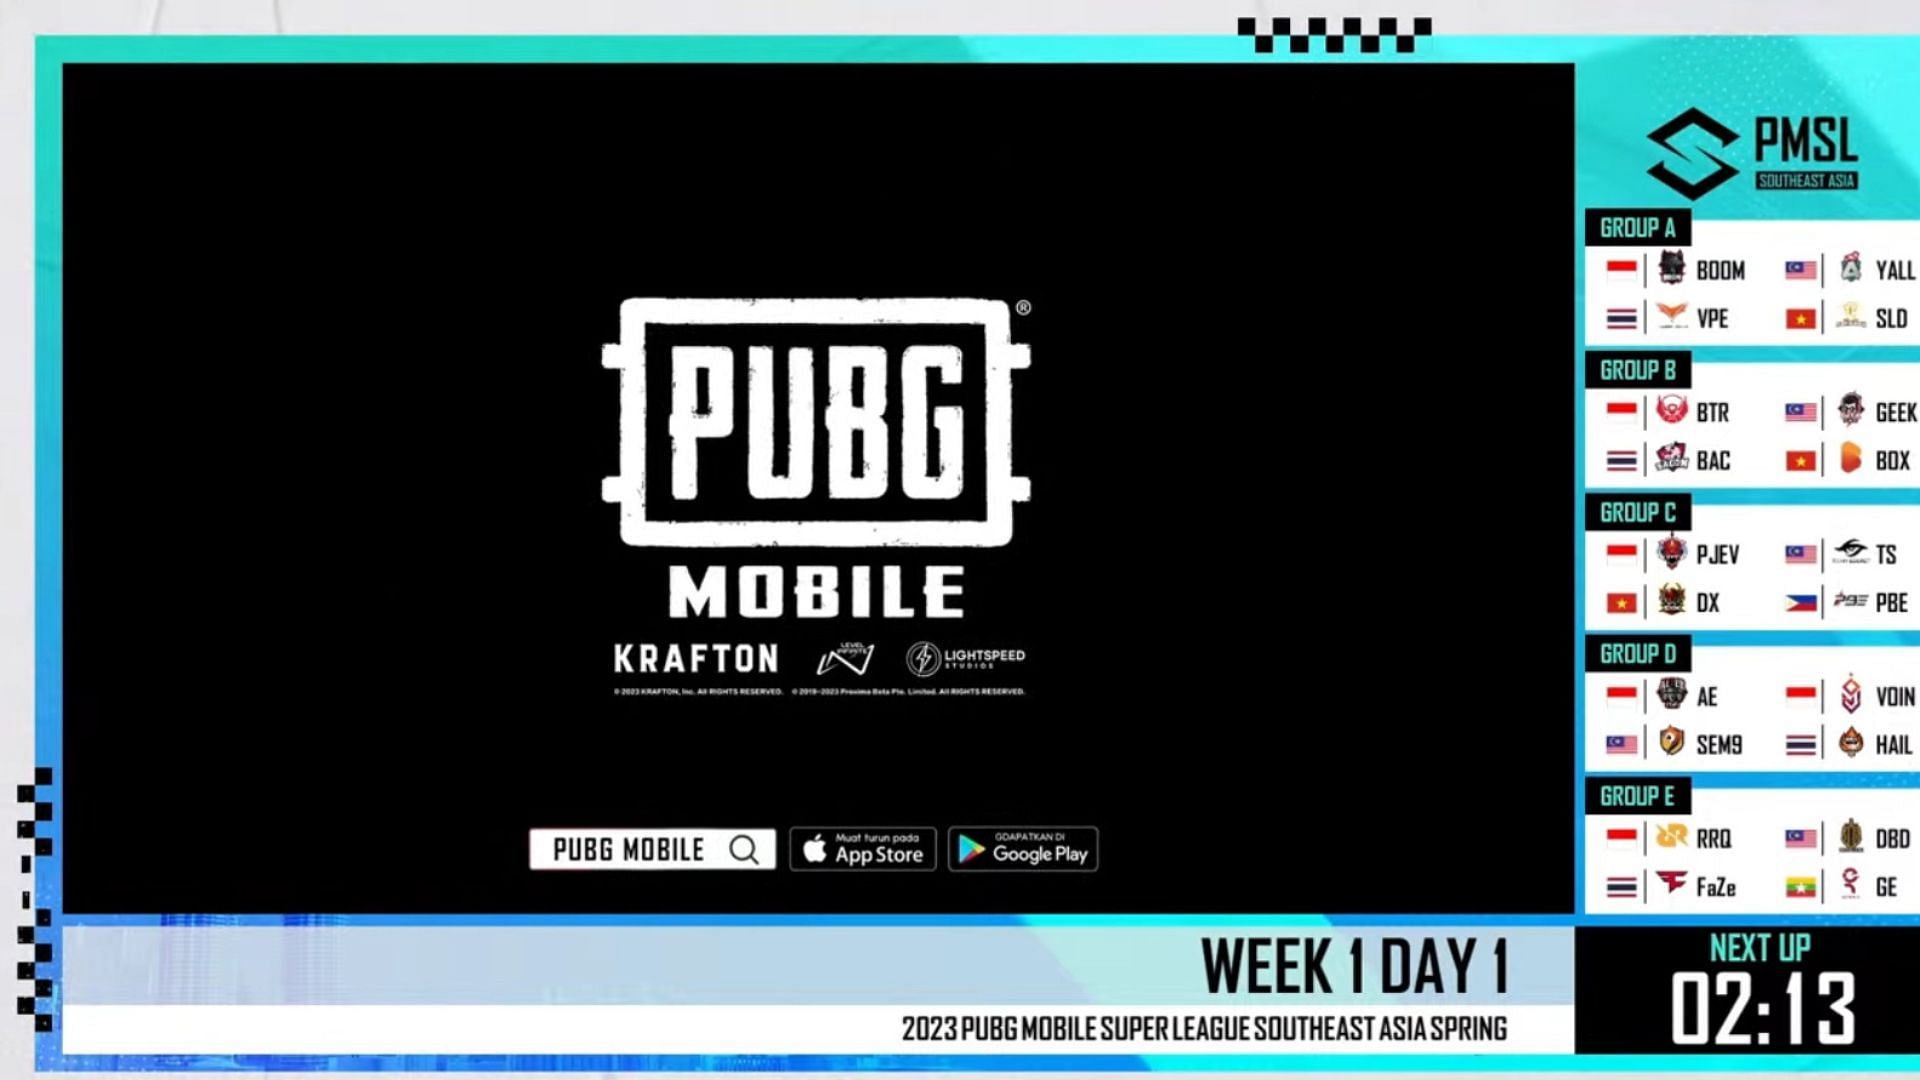 PMSL Day 1 featured six matches (Image via PUBG Mobile)